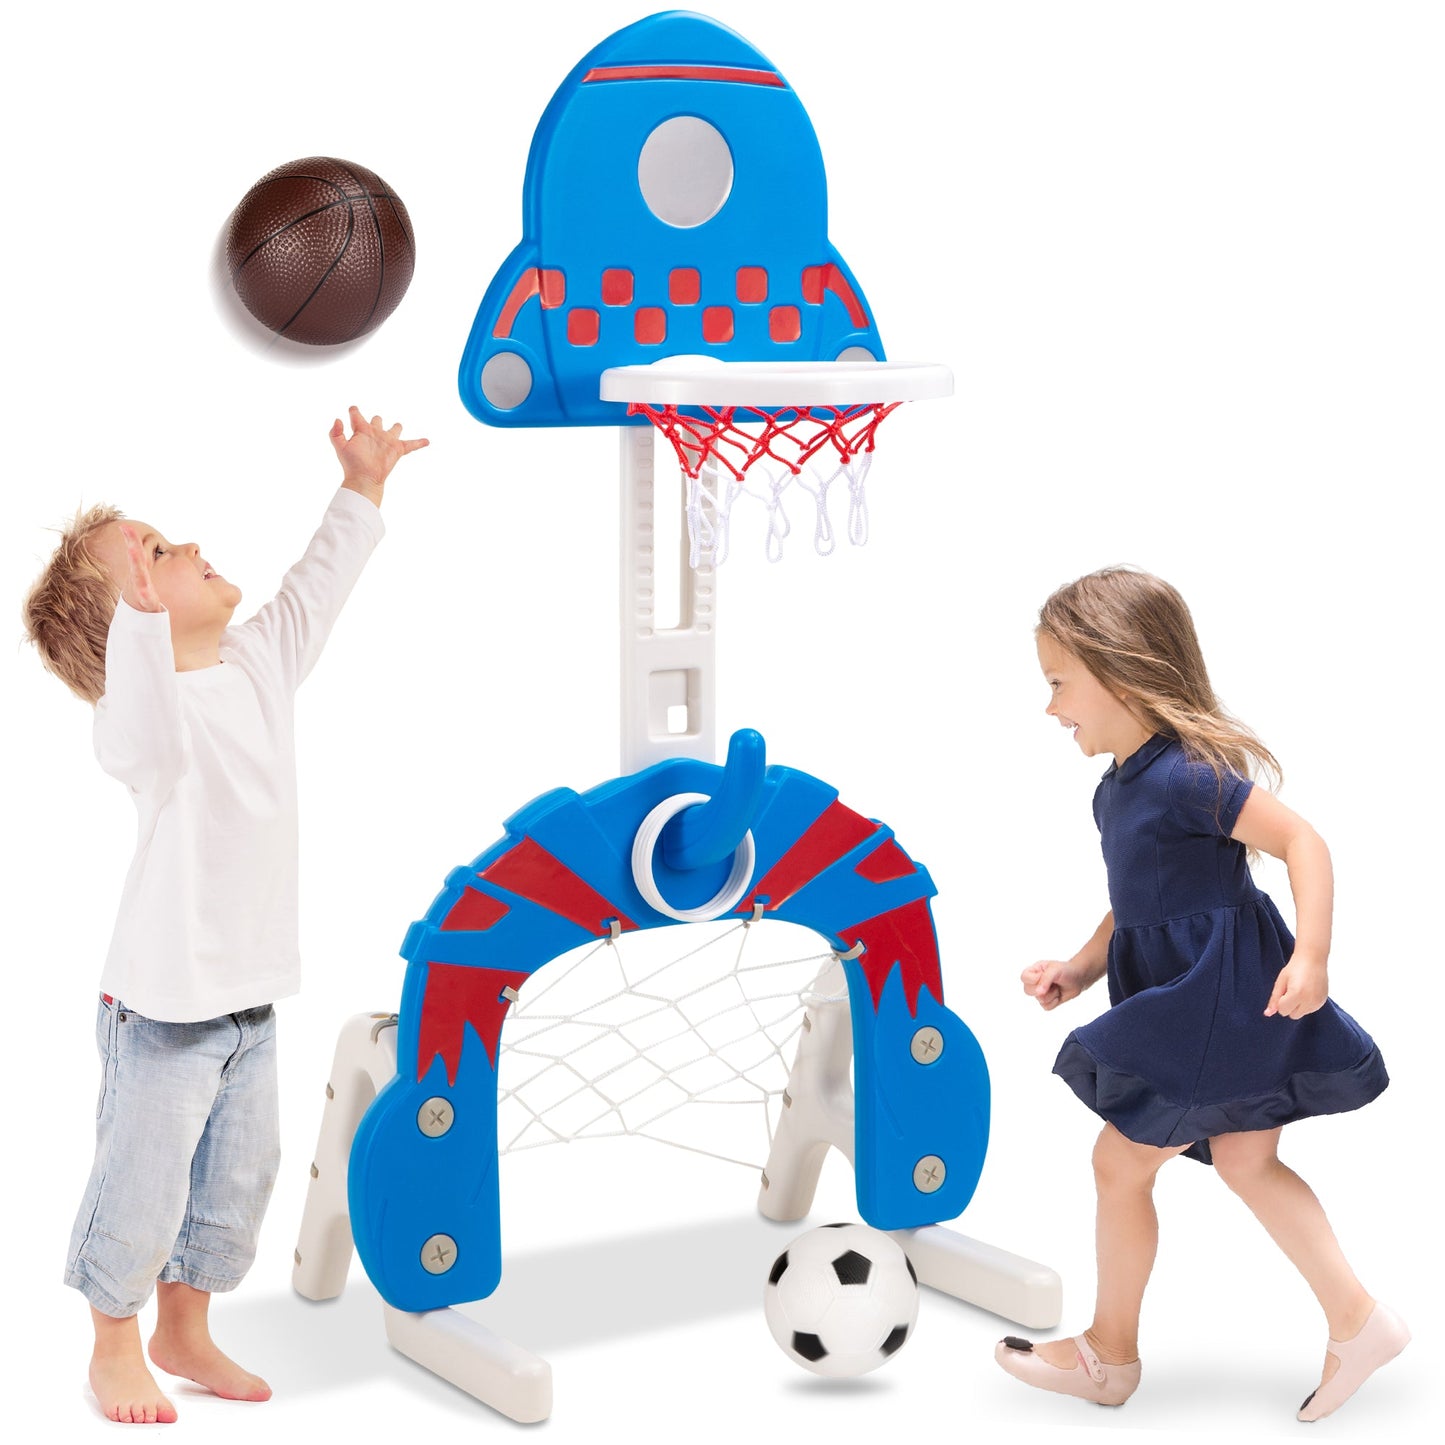 3-in-1 Toddler Basketball Hoop Sports Activity Center Play Set